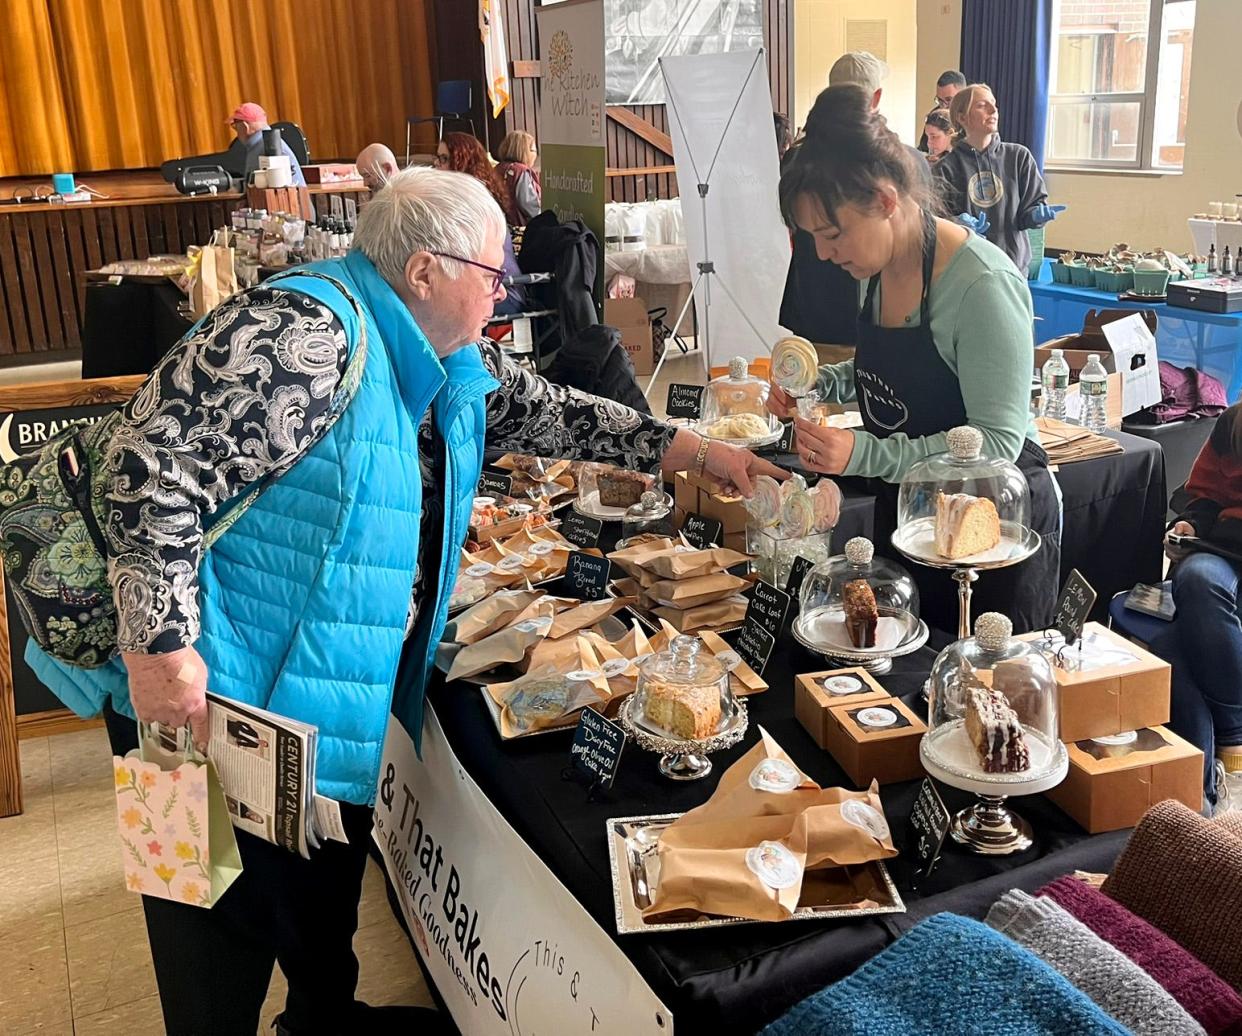 The Fourth Annual Mother's Day Specialty Market at Tiverton Middle School will offer plenty of options for mom and live entertainment.